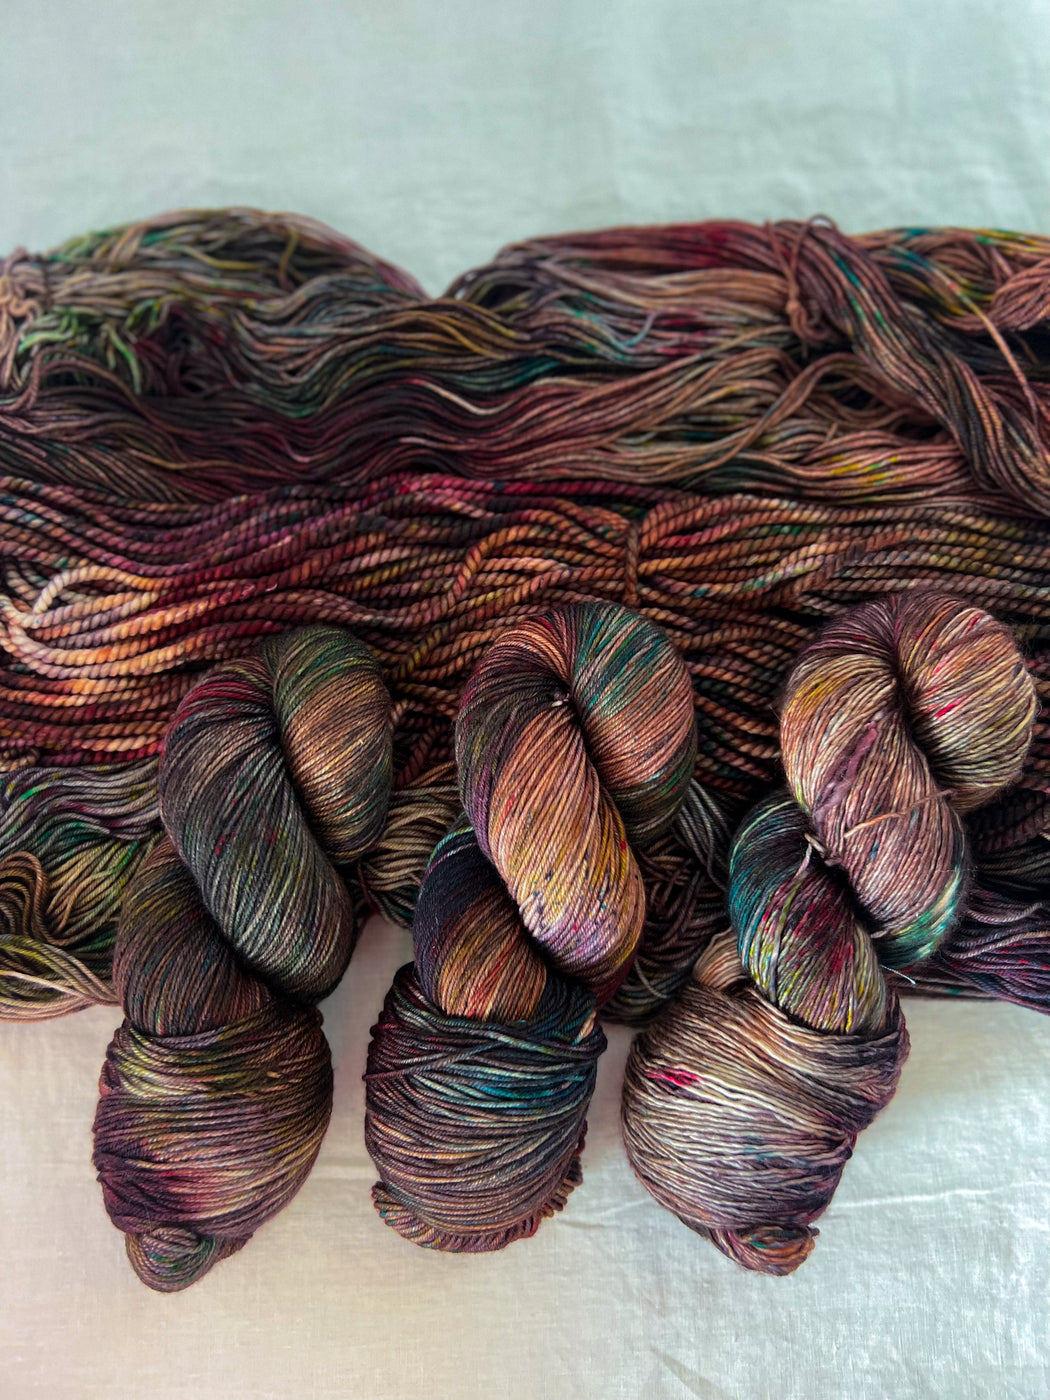 Cathedral Portal - Ruby and Roses Yarn - Hand Dyed Yarn